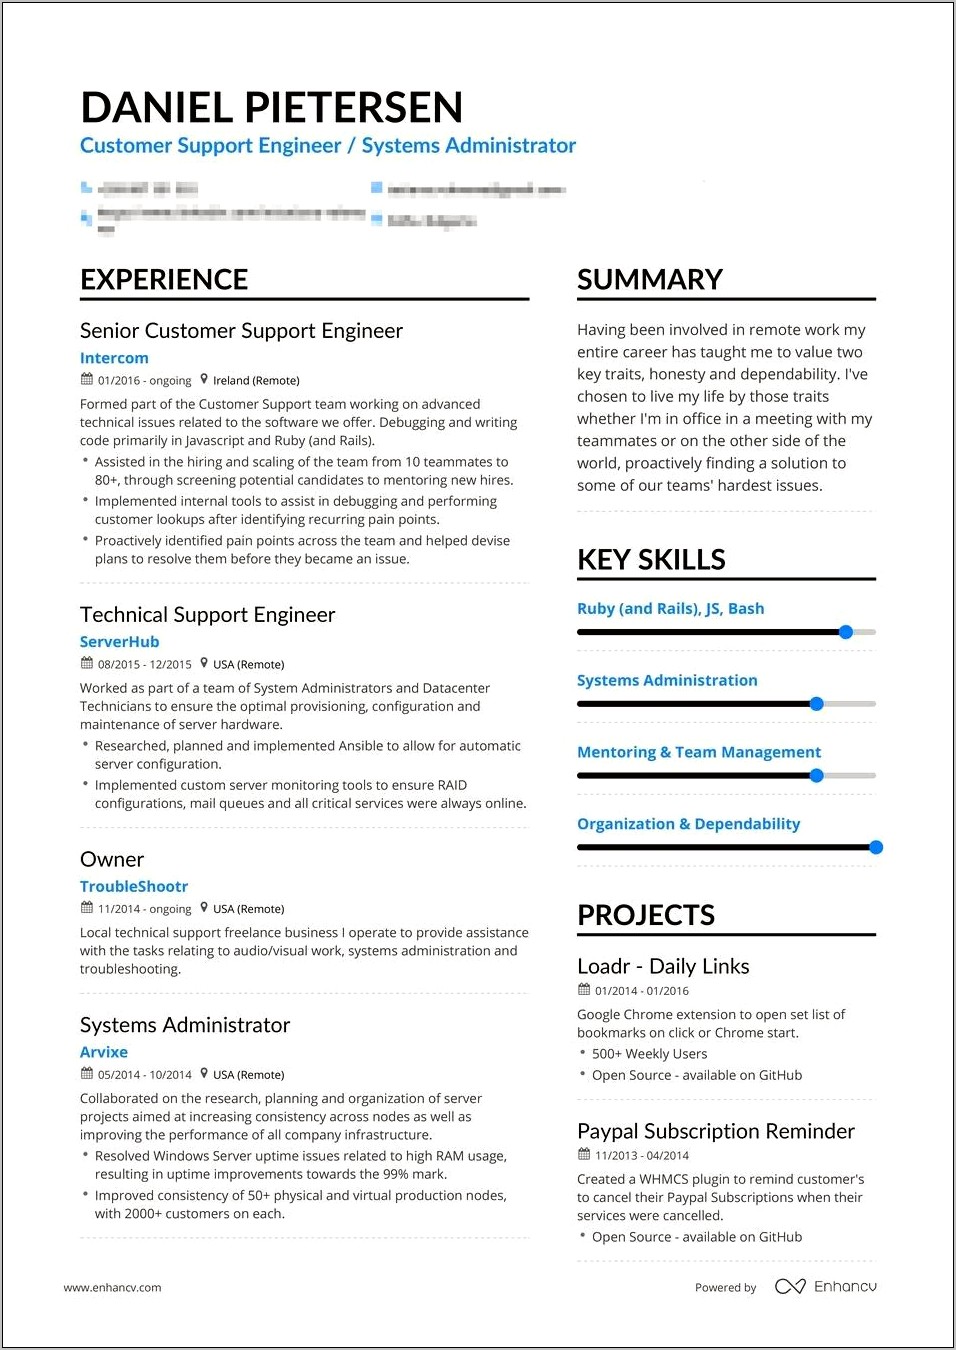 35 Words To Make Your Resume Stand Out